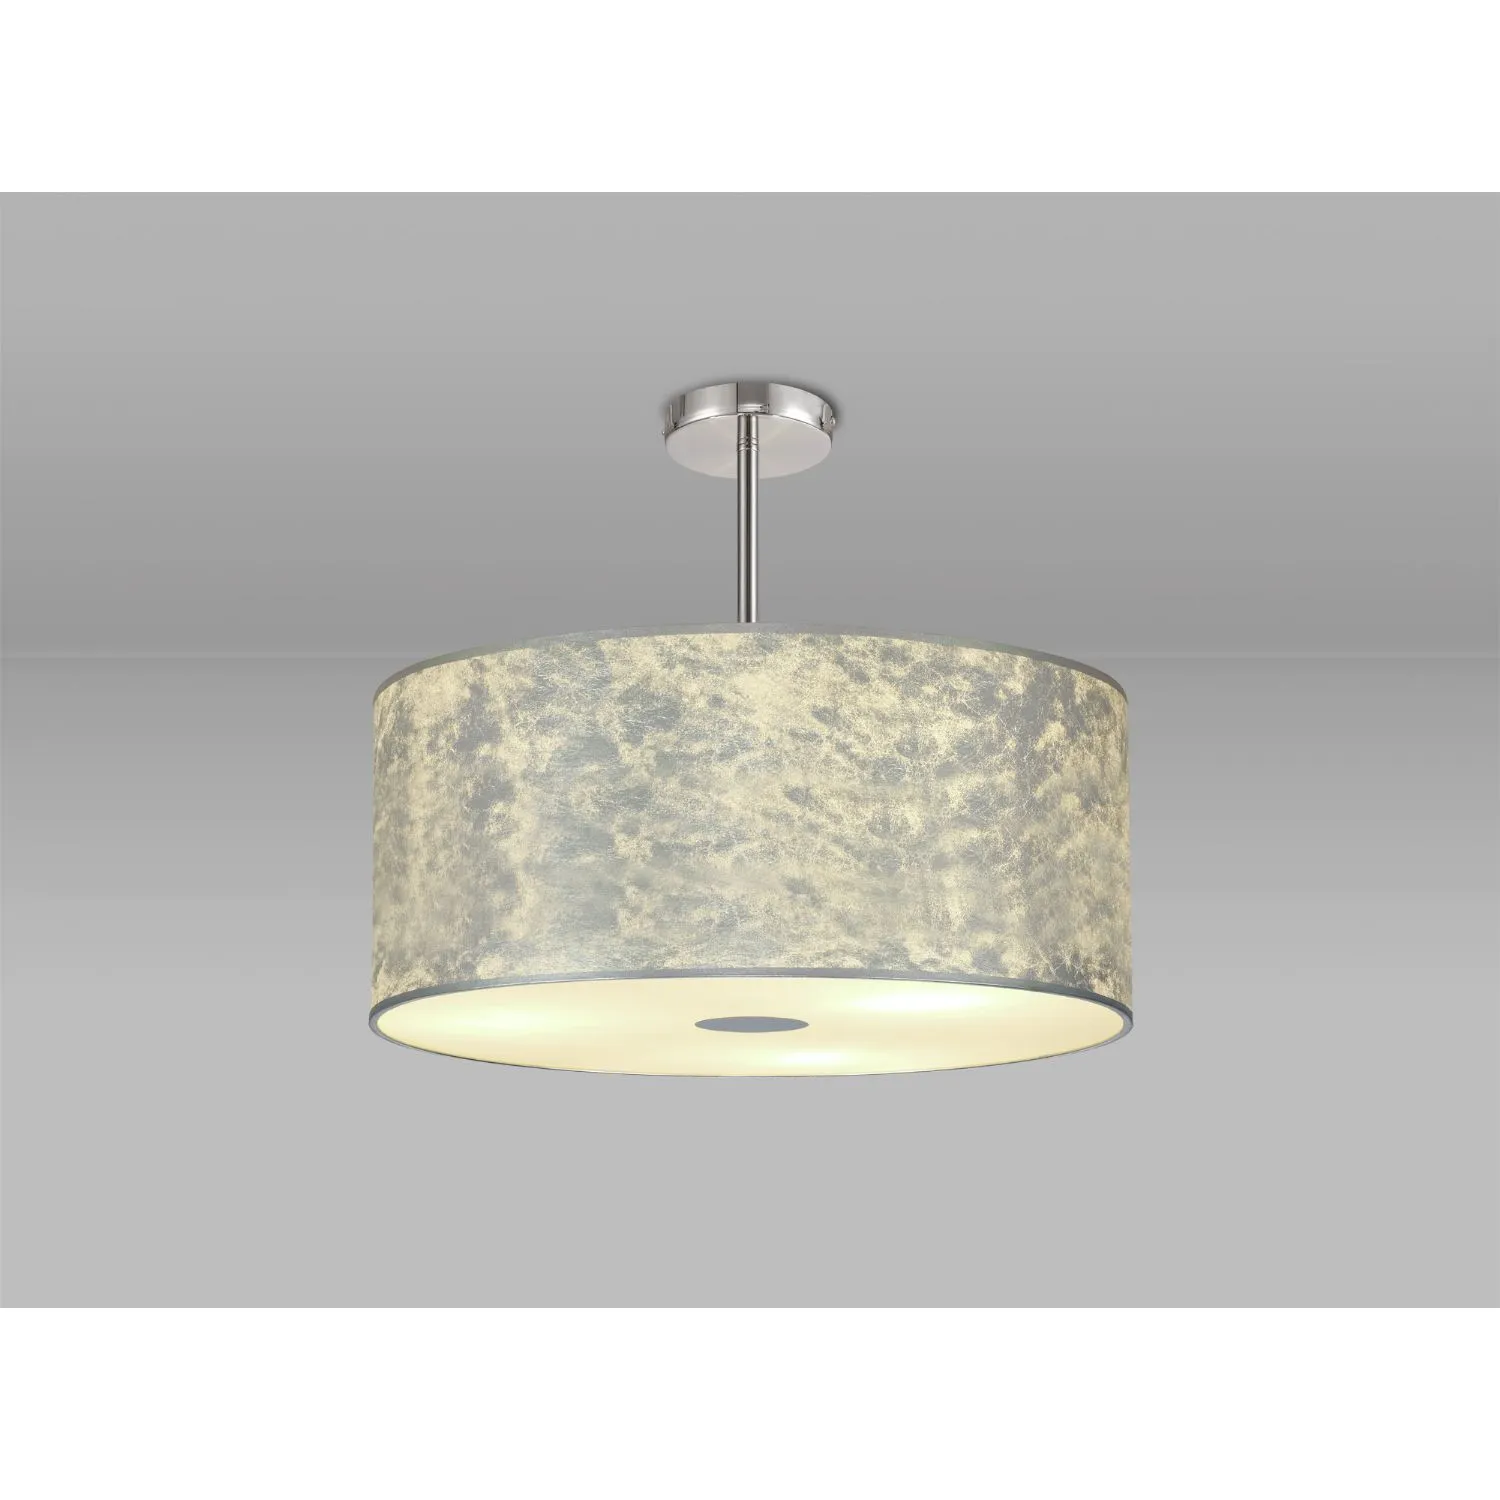 Baymont Polished Chrome 5 Light E27 Semi Flush Fixture With 600mm Silver Leaf Shade With Frosted Acrylic Diffuser With Polished Chrome Centre